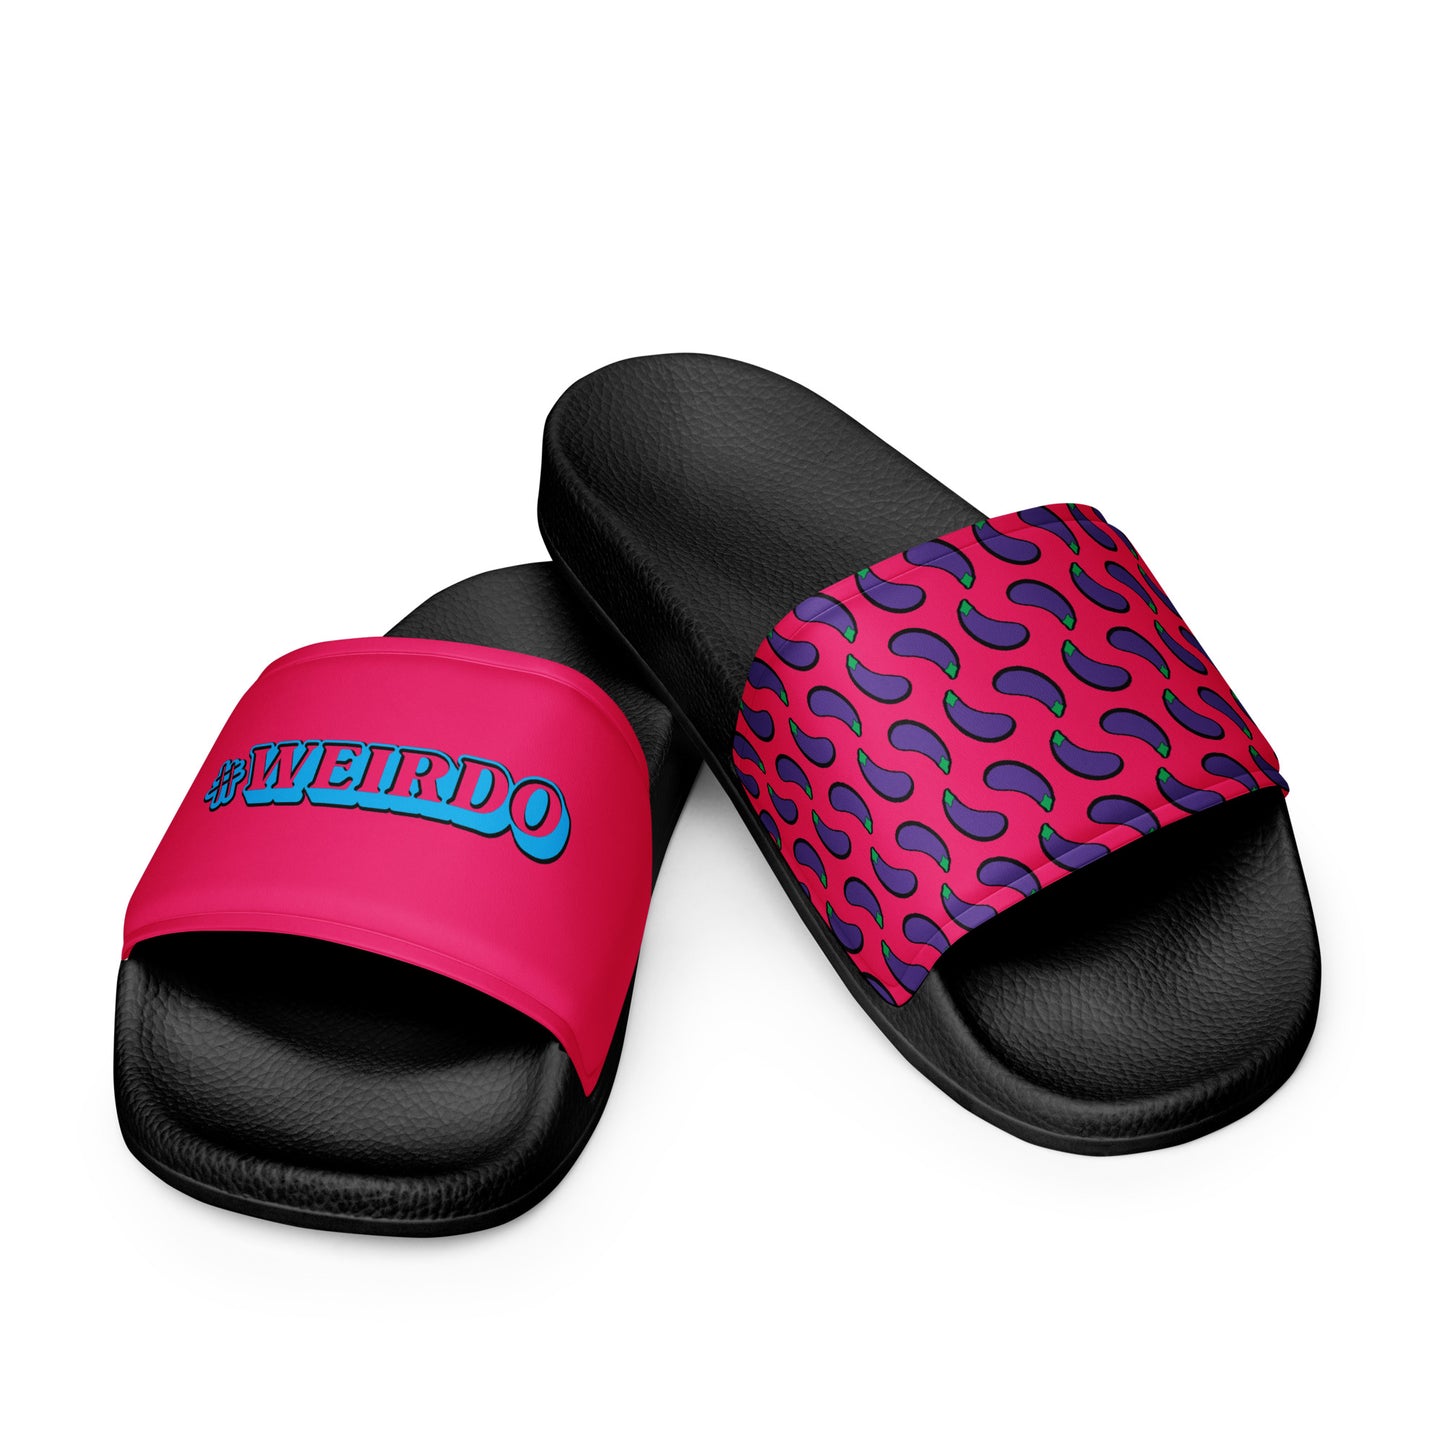 #WEIRDO | Slides for men with the #WEIRDO fun meme on one slide and the "eggplant" pattern on the other slide